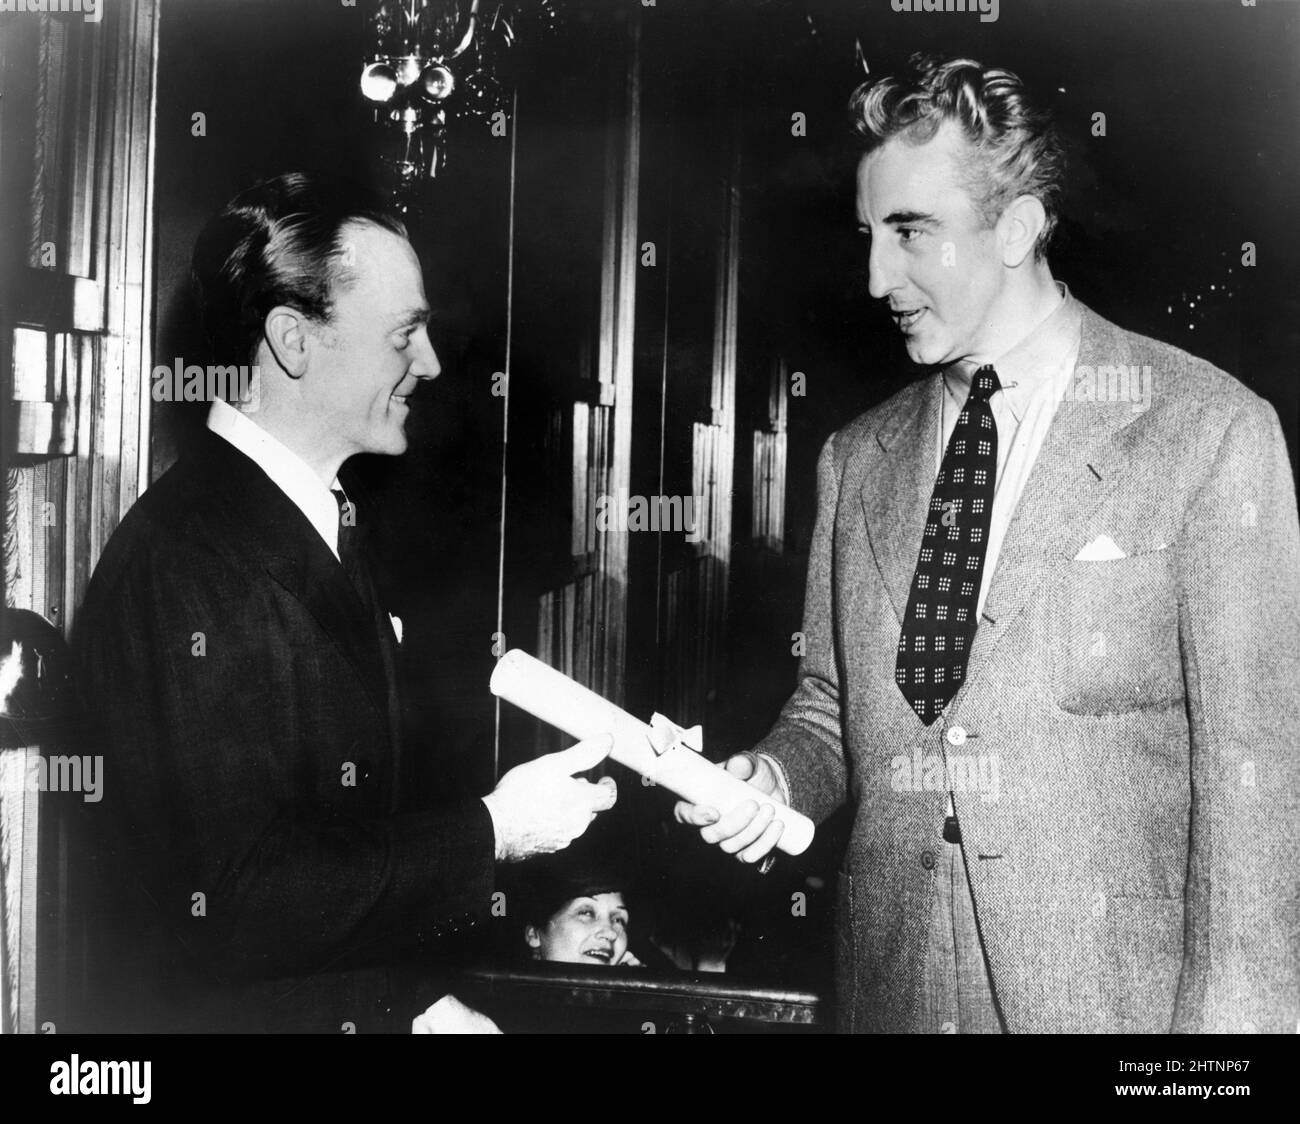 JAMES CAGNEY receiving the New York Film Critics Circle Award for Best Actor of 1938 for his performance as Rocky Sullivan in ANGELS WITH DIRTY FACES presented by screenwriter DUDLEY NICHOLS, President of the Screen Writers Guild, at a ceremony in the Rainbow Room, Rockefeller Centre in New York in January 1939 Stock Photo